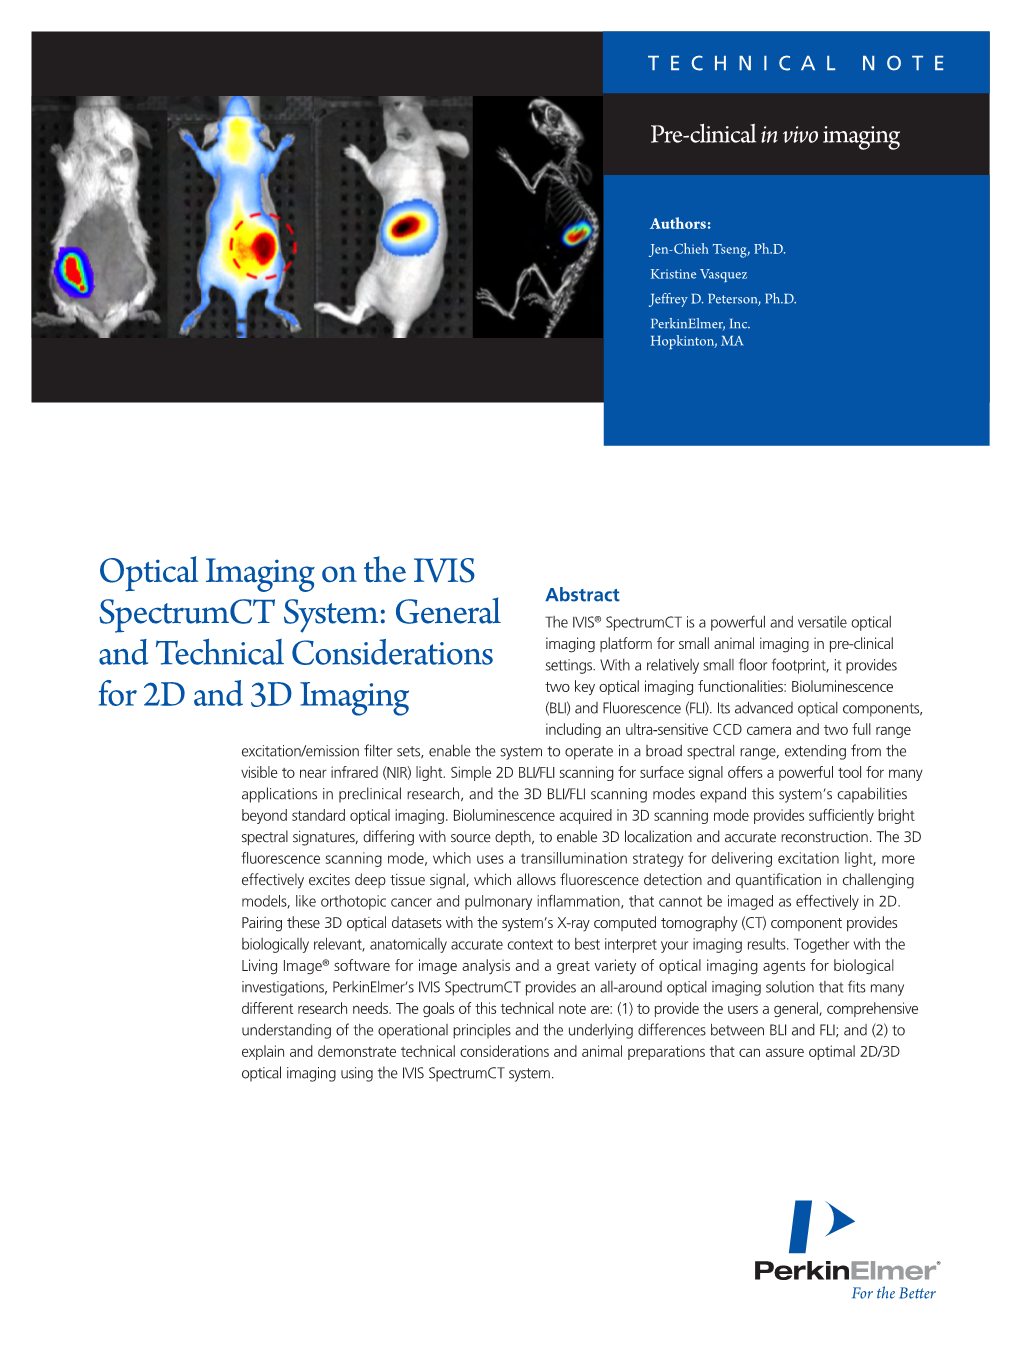 Optical Imaging on the IVIS Spectrumct System